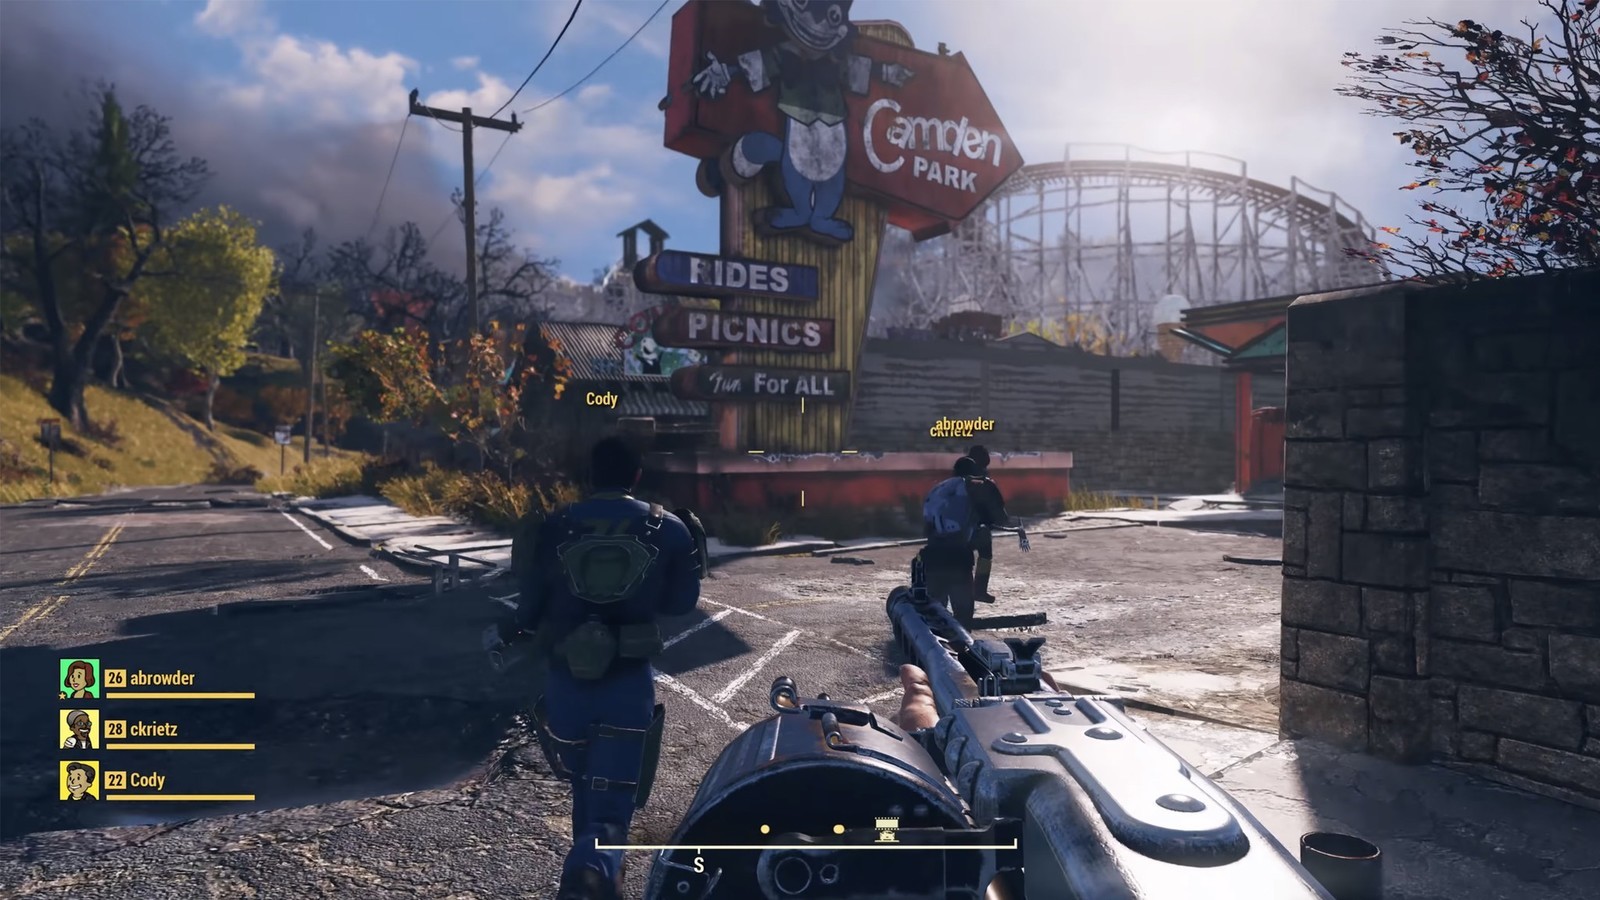 Fallout 76 Online Will Adapt To Players’ Needs